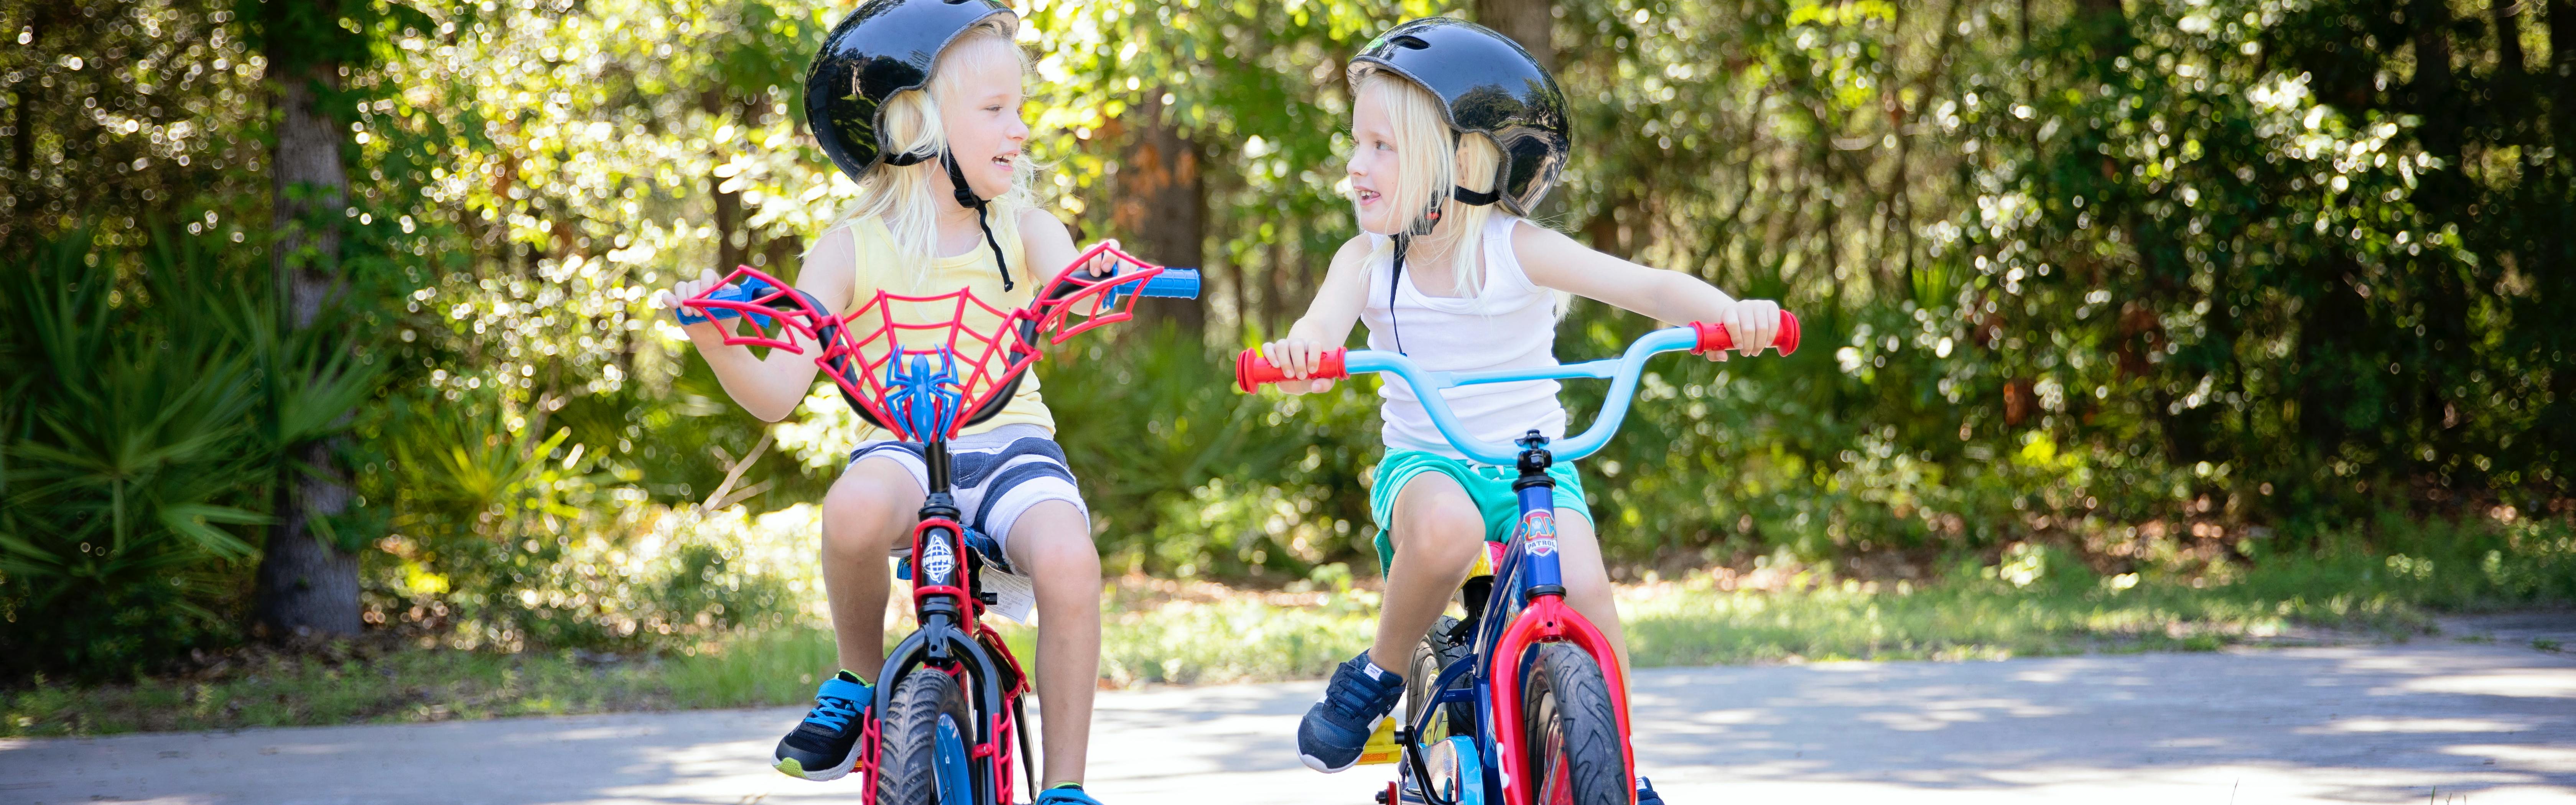 Two young girls riding bikes. 